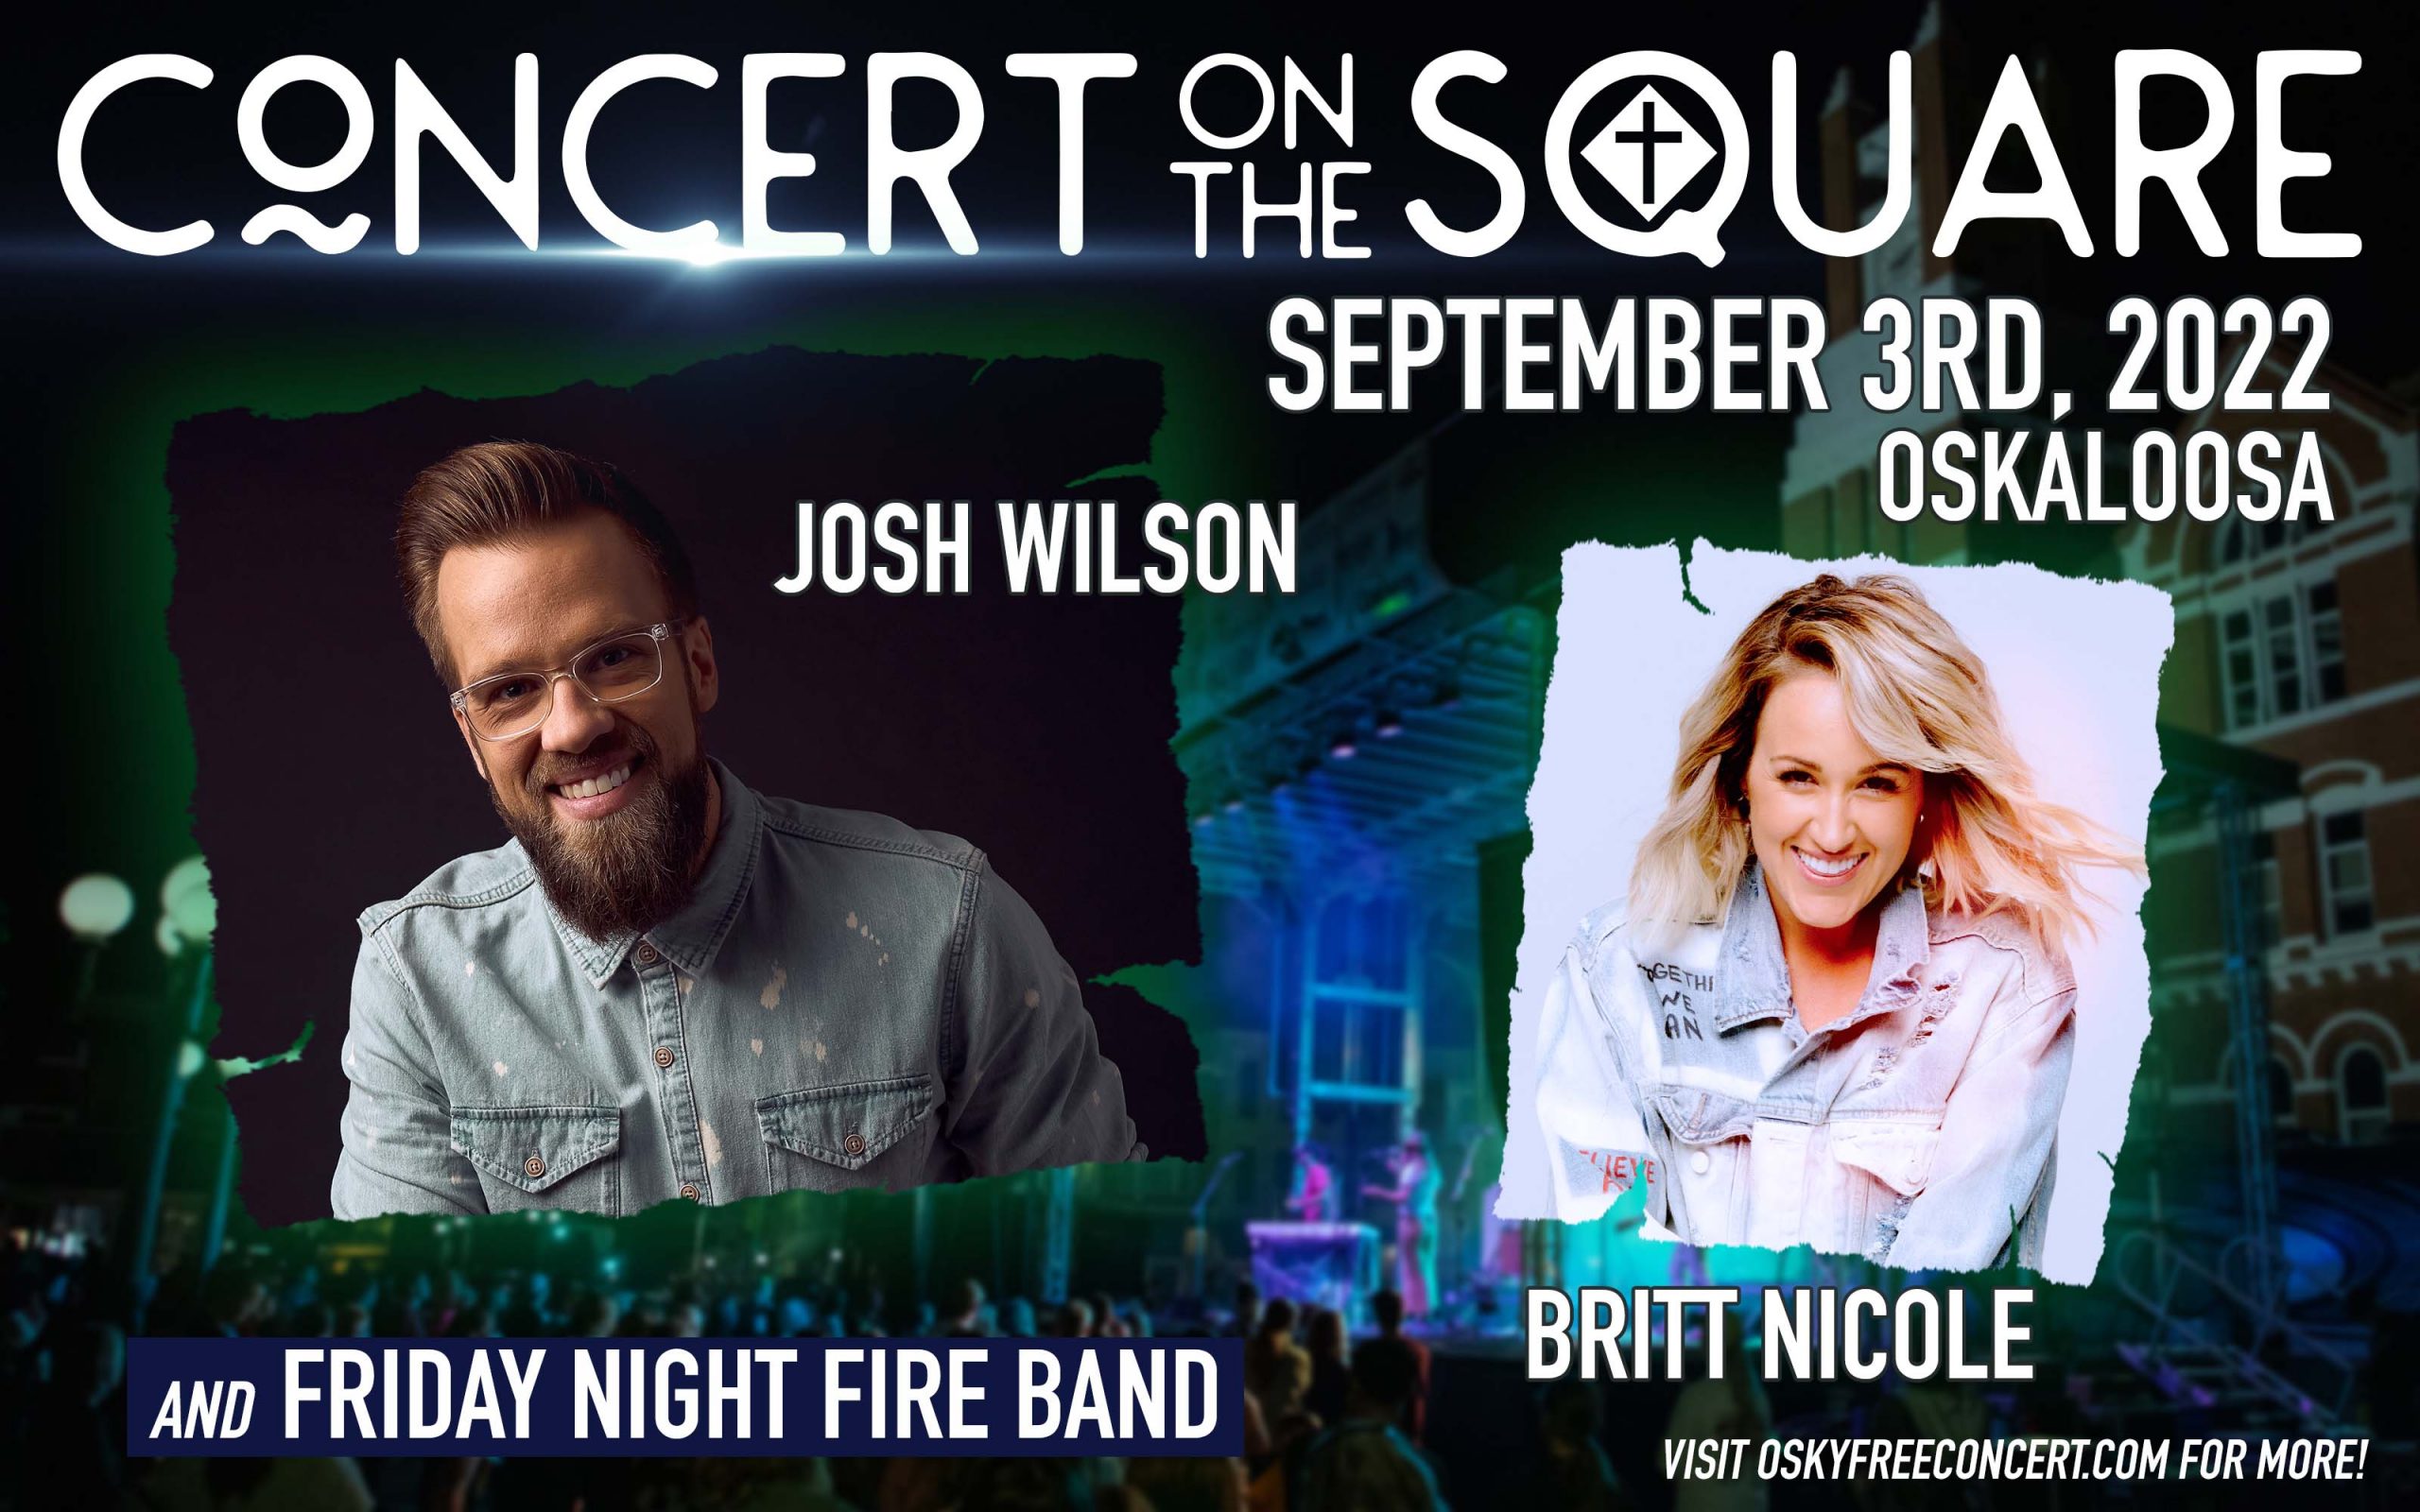 Concert on the Square 2022 Artist Announcement